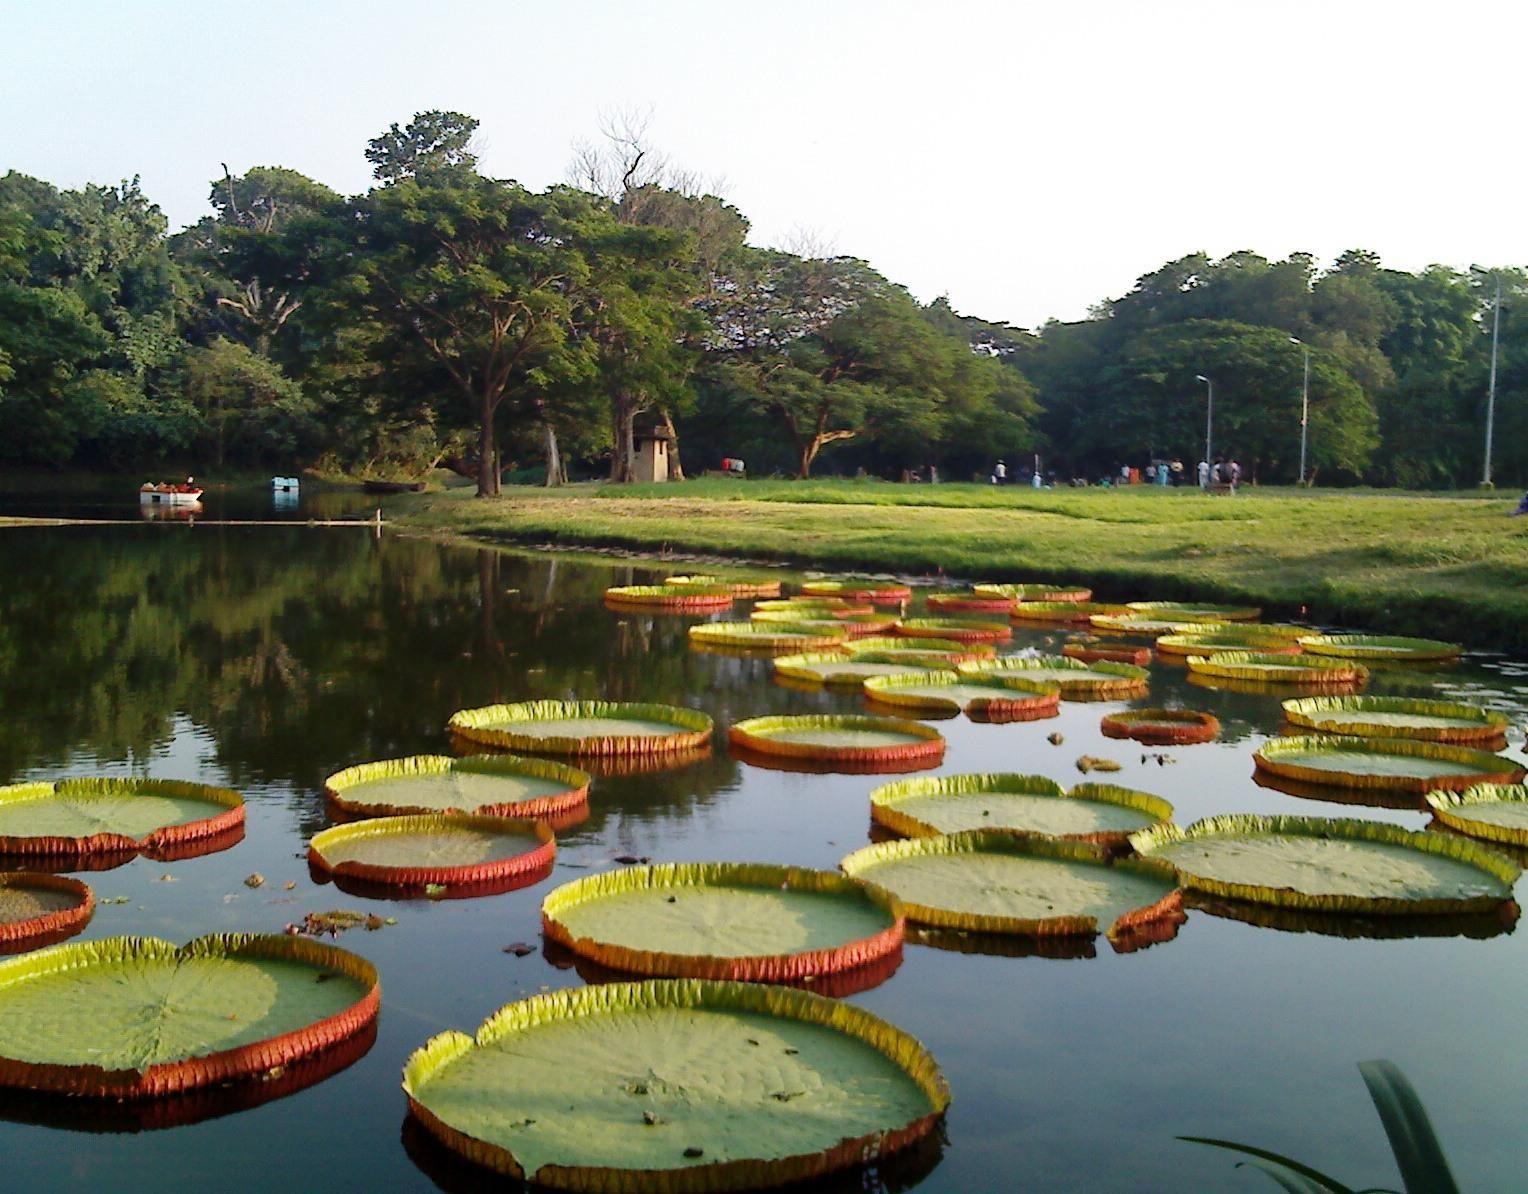 The Botanical Gardens of Calcutta were founded by Robert Kyd in 1787